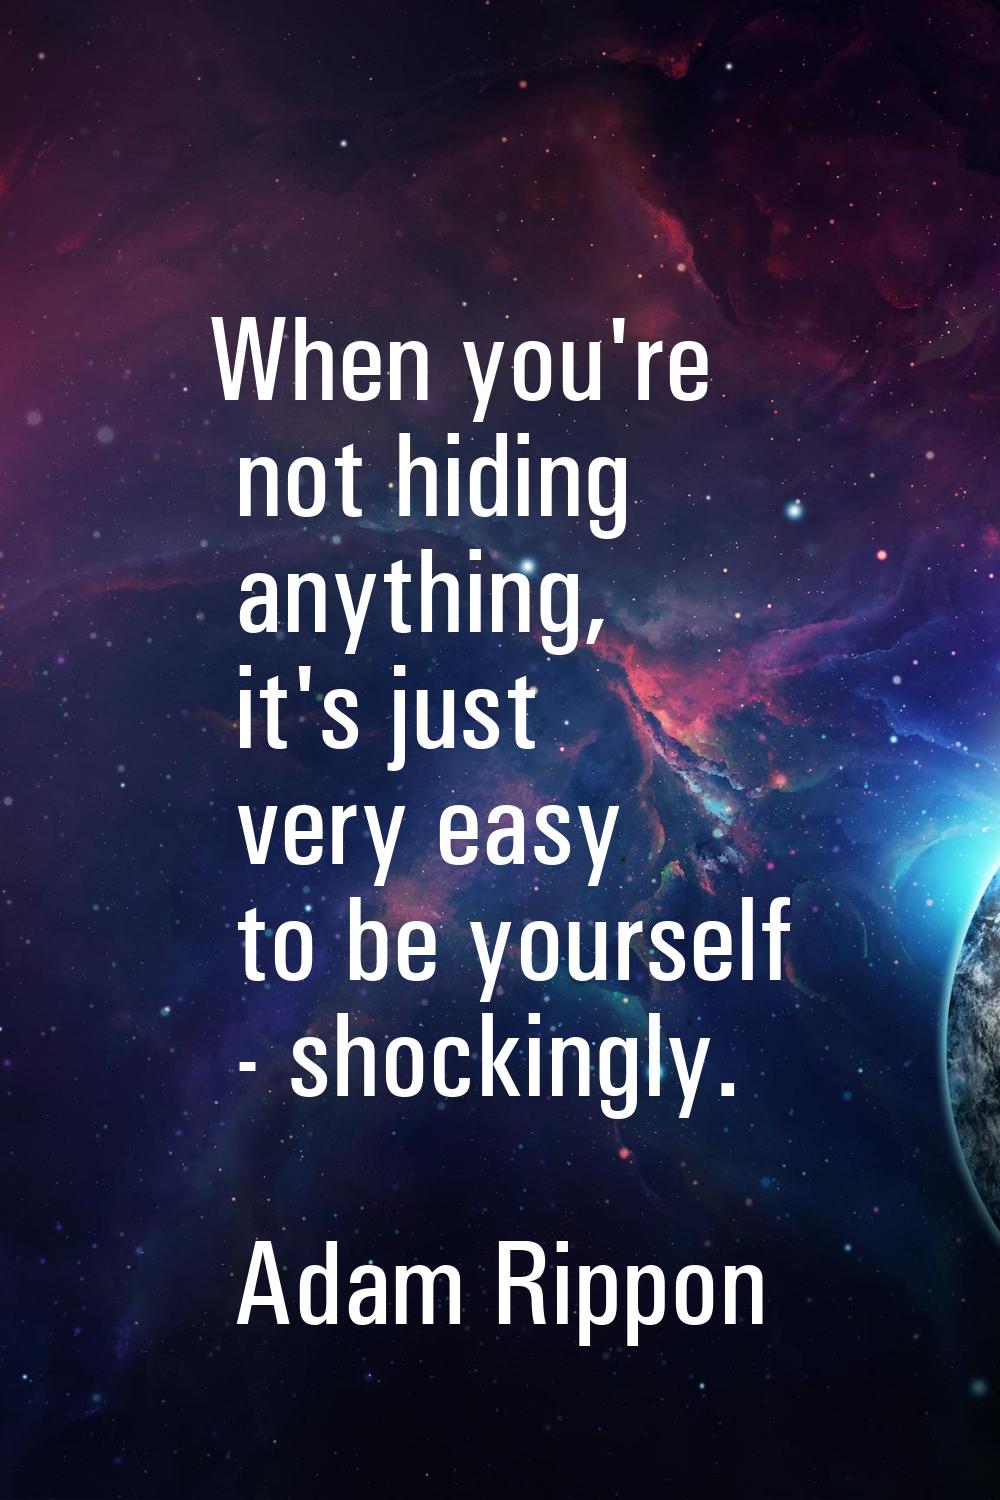 When you're not hiding anything, it's just very easy to be yourself - shockingly.